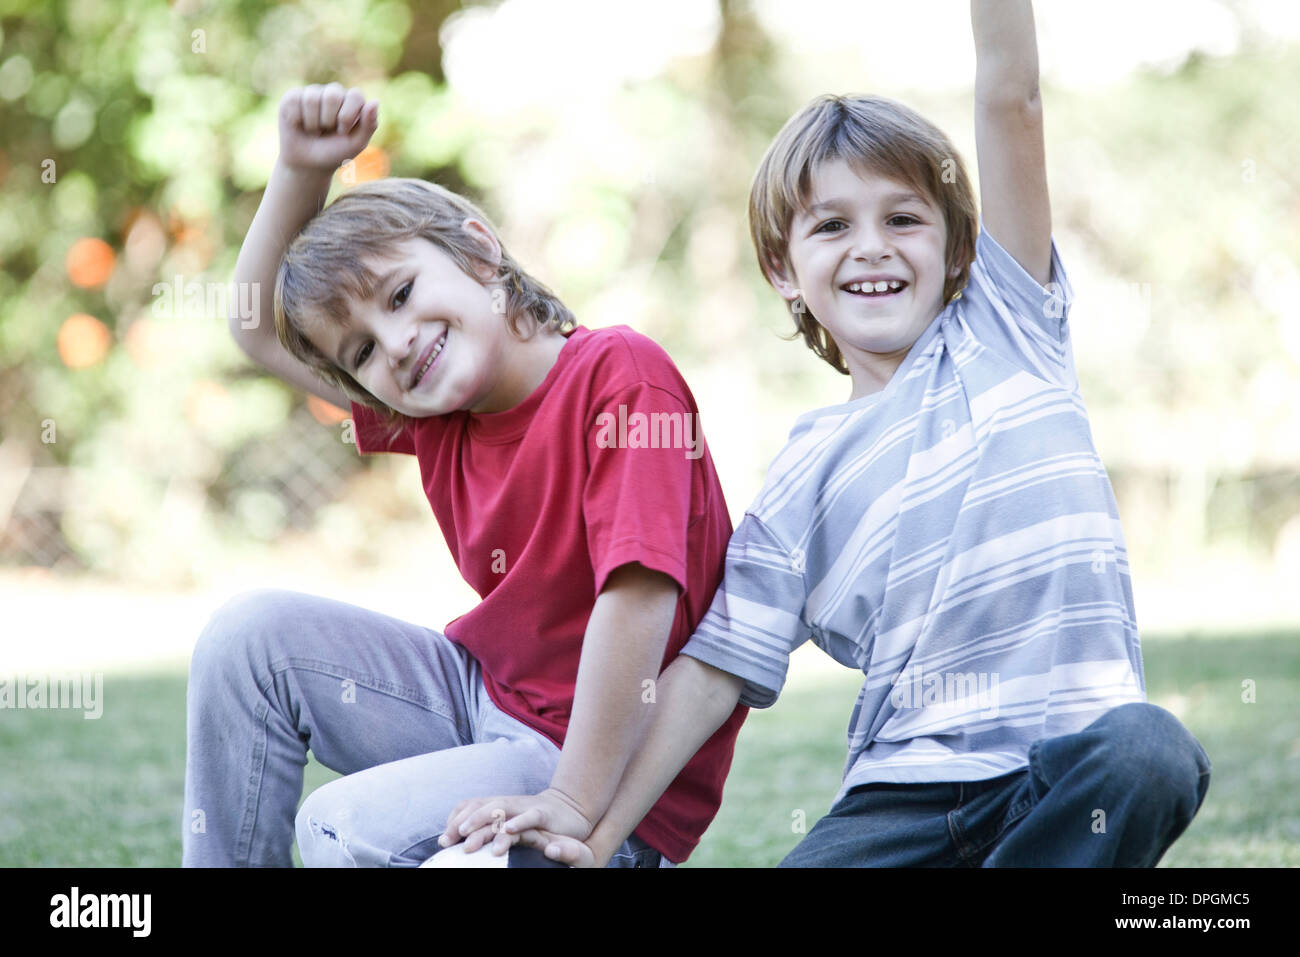 Boys crouching on field with soccer ball, both cheering with arms in air Stock Photo